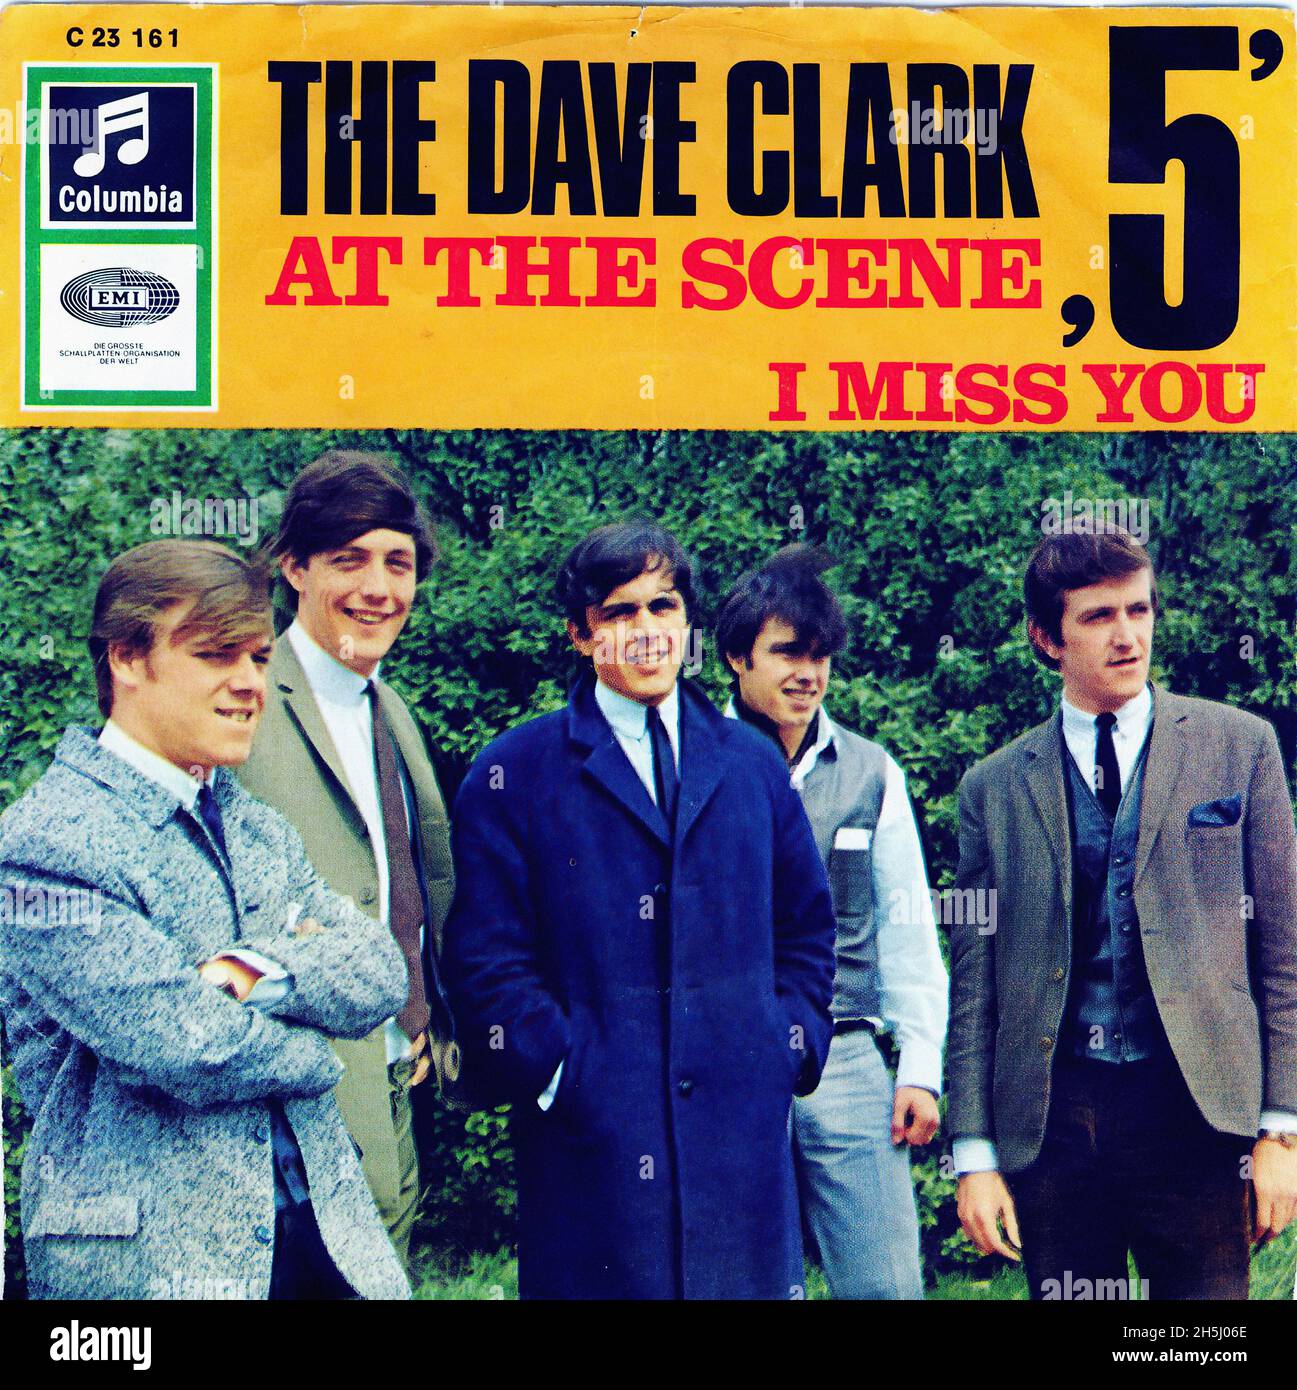 Vintage single record cover - Dave Clark Five, The - At The Scene - D -  1966 Stock Photo - Alamy